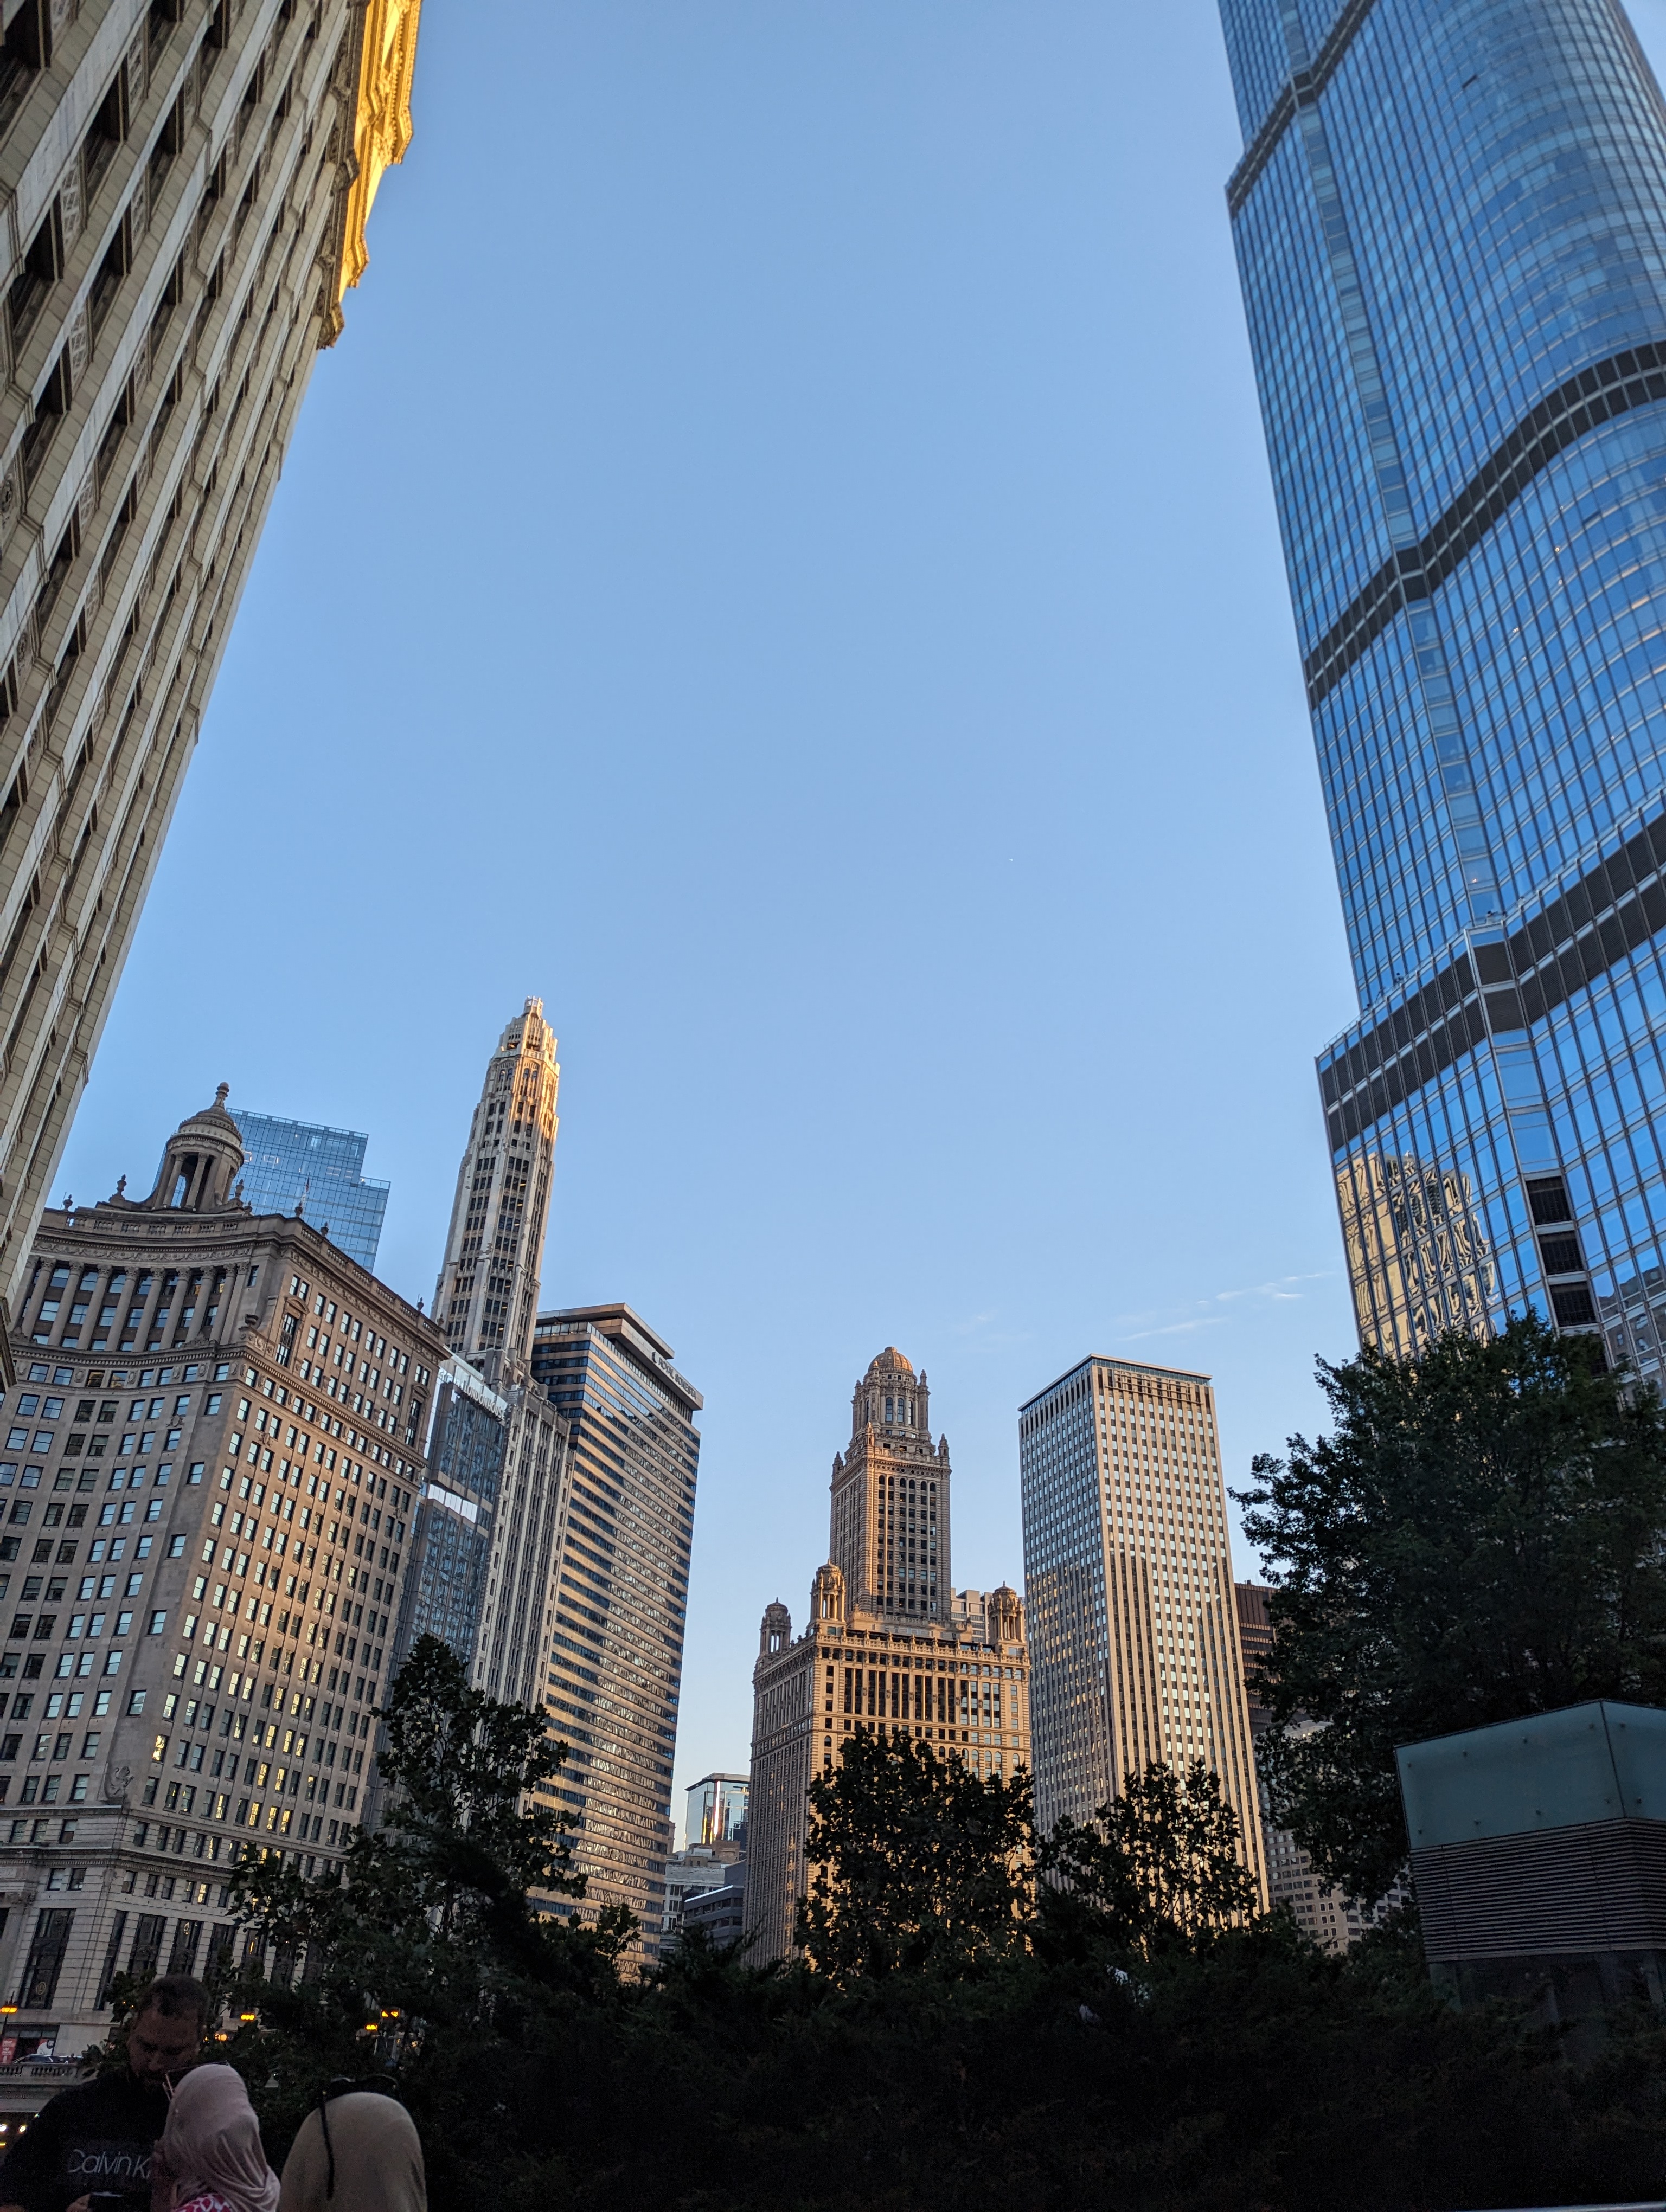 A group of tall buildings against a blue sky seen from street level. Trees branches and leaves along the bottom of the image, with some people's faces being visible in the bottom left.